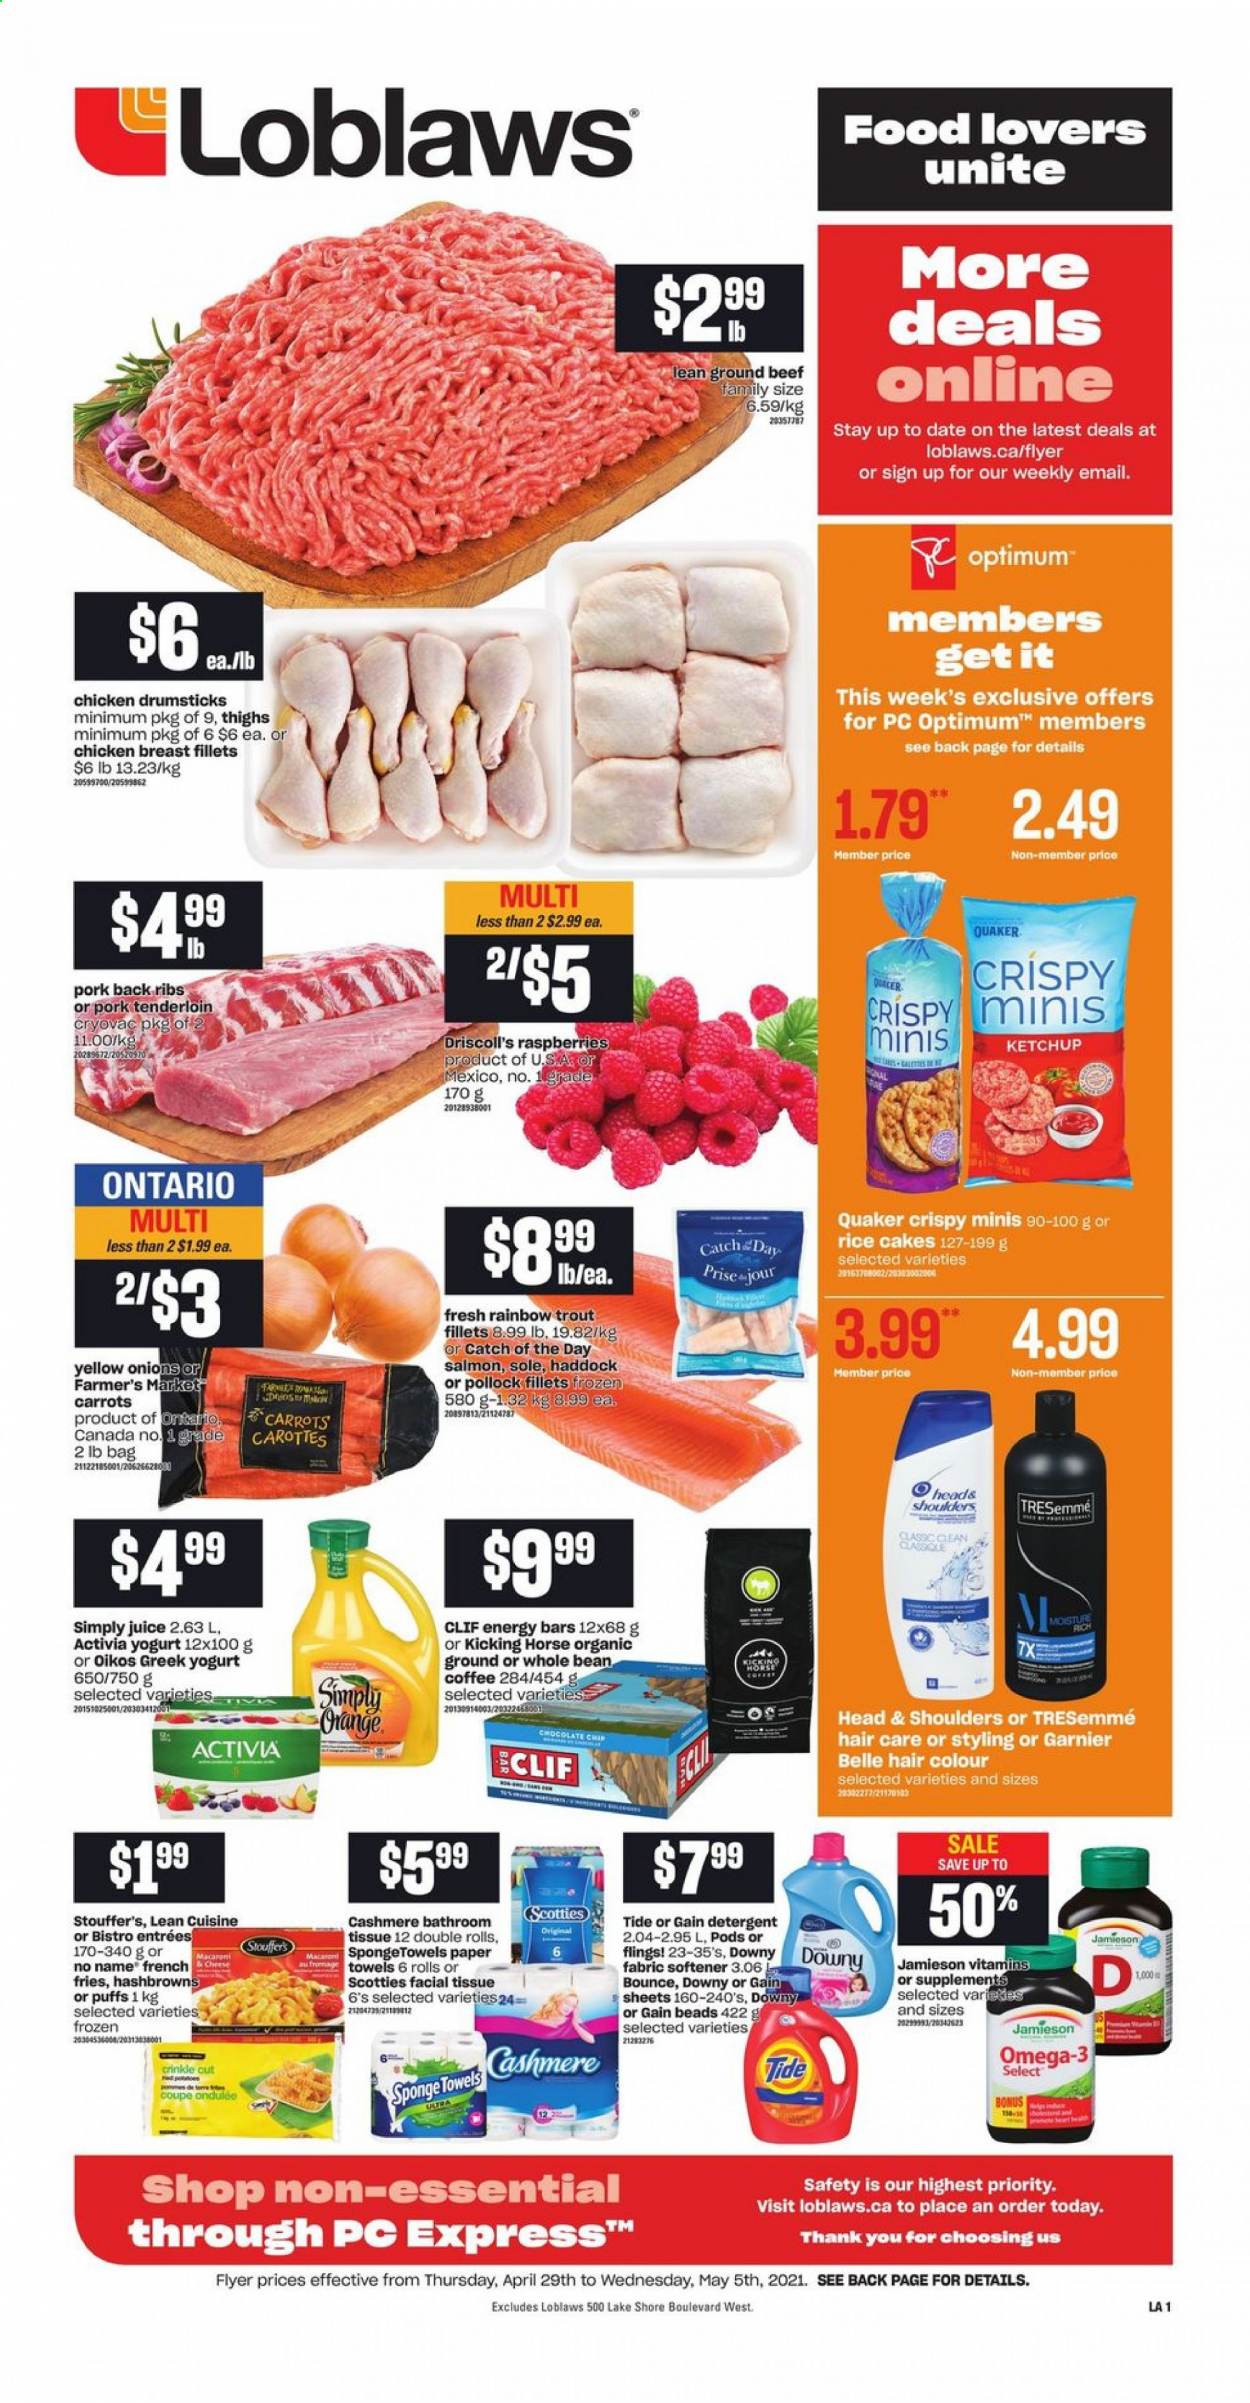 thumbnail - Loblaws Flyer - April 29, 2021 - May 05, 2021 - Sales products - puffs, carrots, onion, salmon, trout, haddock, pollock, No Name, Quaker, Lean Cuisine, greek yoghurt, yoghurt, Activia, Oikos, Stouffer's, hash browns, potato fries, chocolate chips, energy bar, juice, coffee, chicken breasts, chicken drumsticks, chicken, beef meat, ground beef, pork meat, pork ribs, pork tenderloin, pork back ribs, bath tissue, Gain, Tide, fabric softener, Bounce, Downy Laundry, TRESemmé, hair color, Optimum, Omega-3, Garnier, Head & Shoulders. Page 1.